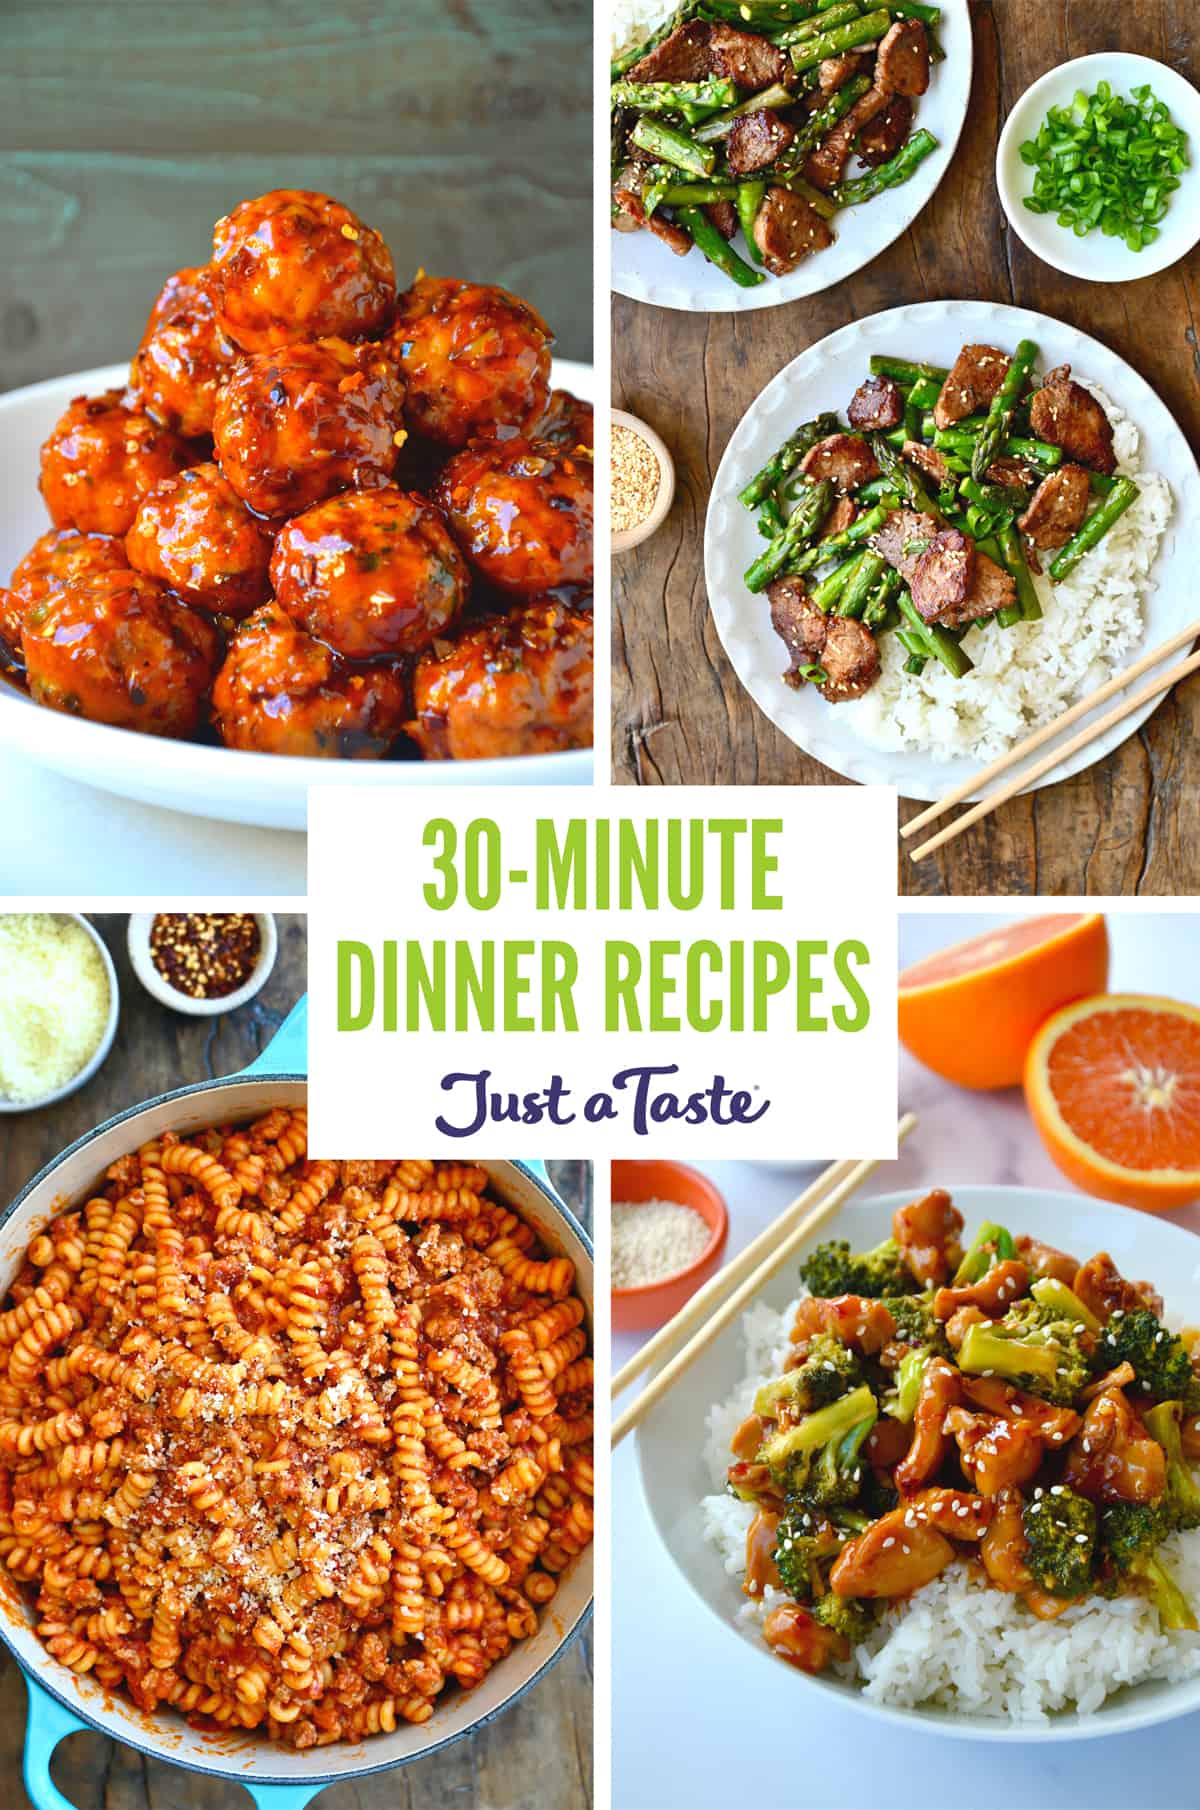 A collage of recipes, including orange chicken meatballs, black pepper pork, orange chicken and broccoli stir-fry, and pasta with hearty sausage marinara.